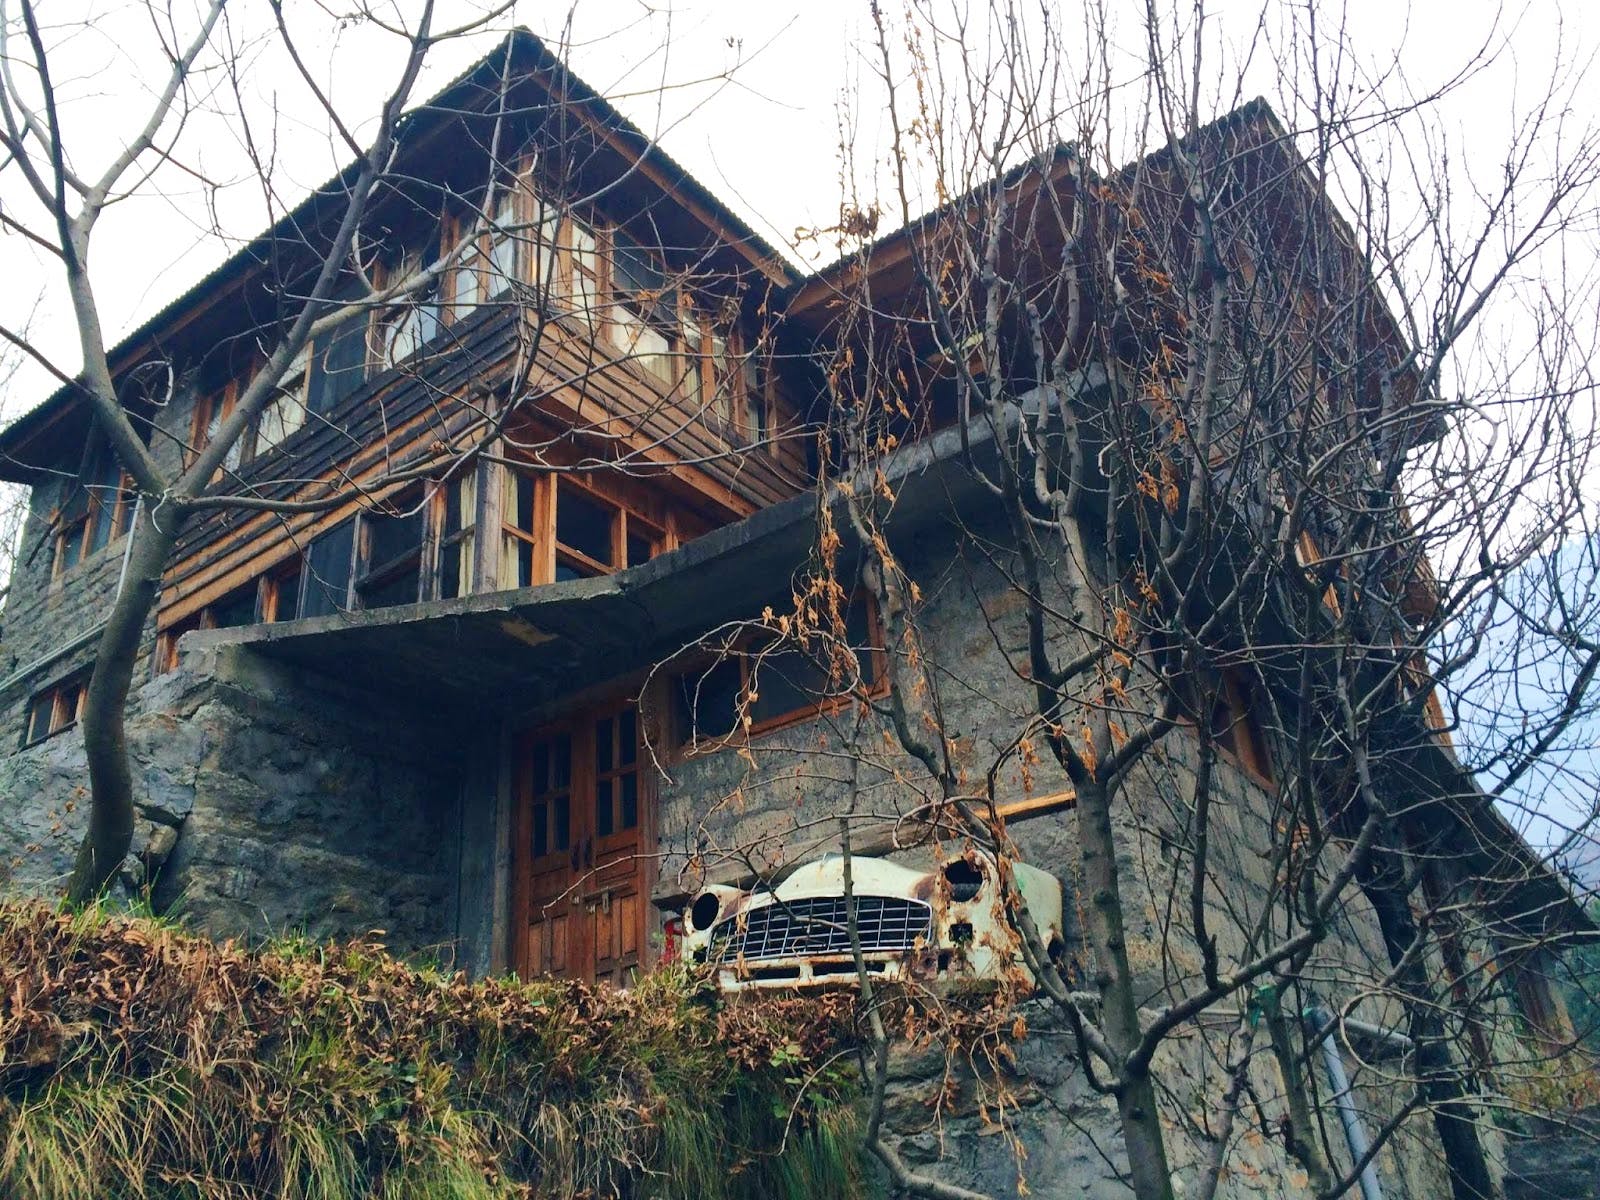 House,Motor vehicle,Tree,Building,Home,Architecture,Roof,Car,Vehicle,Branch